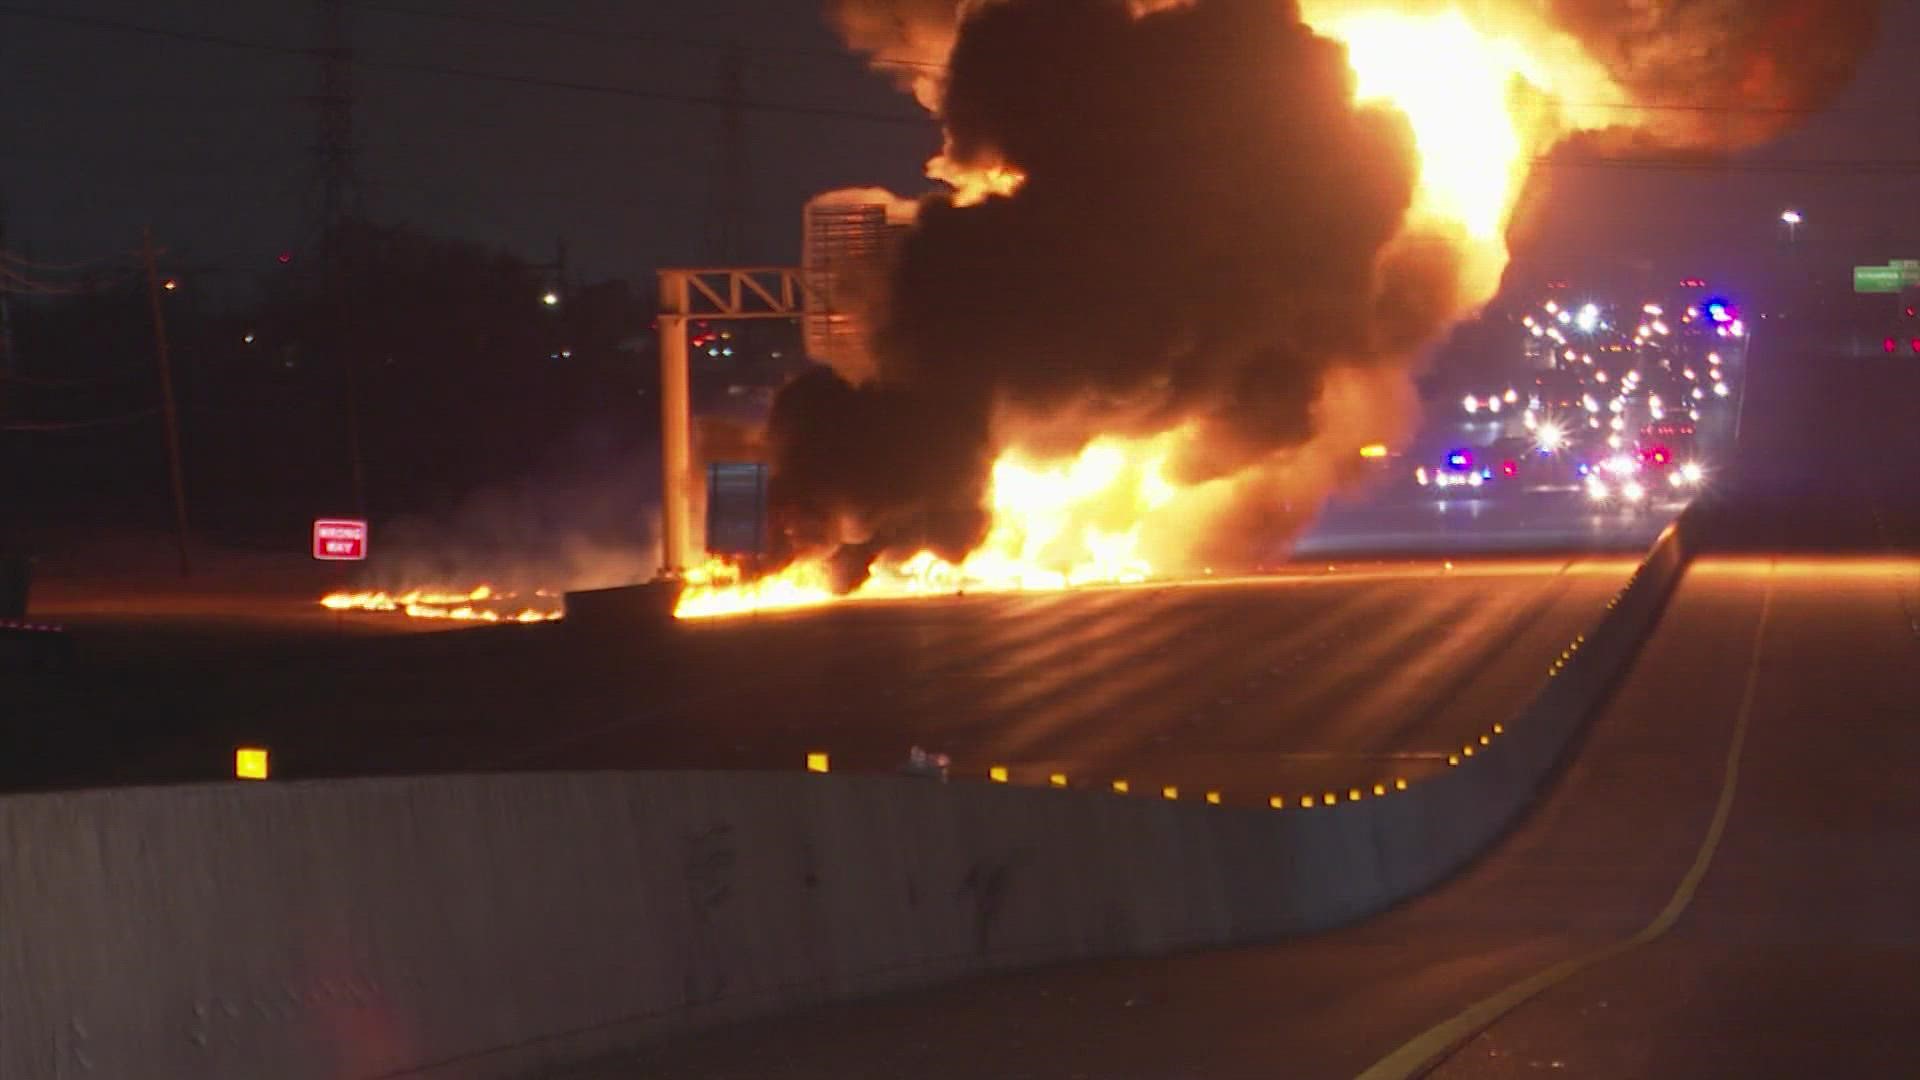 No injuries or fatalities were reported in the fiery crash, according to the Houston Fire Department.